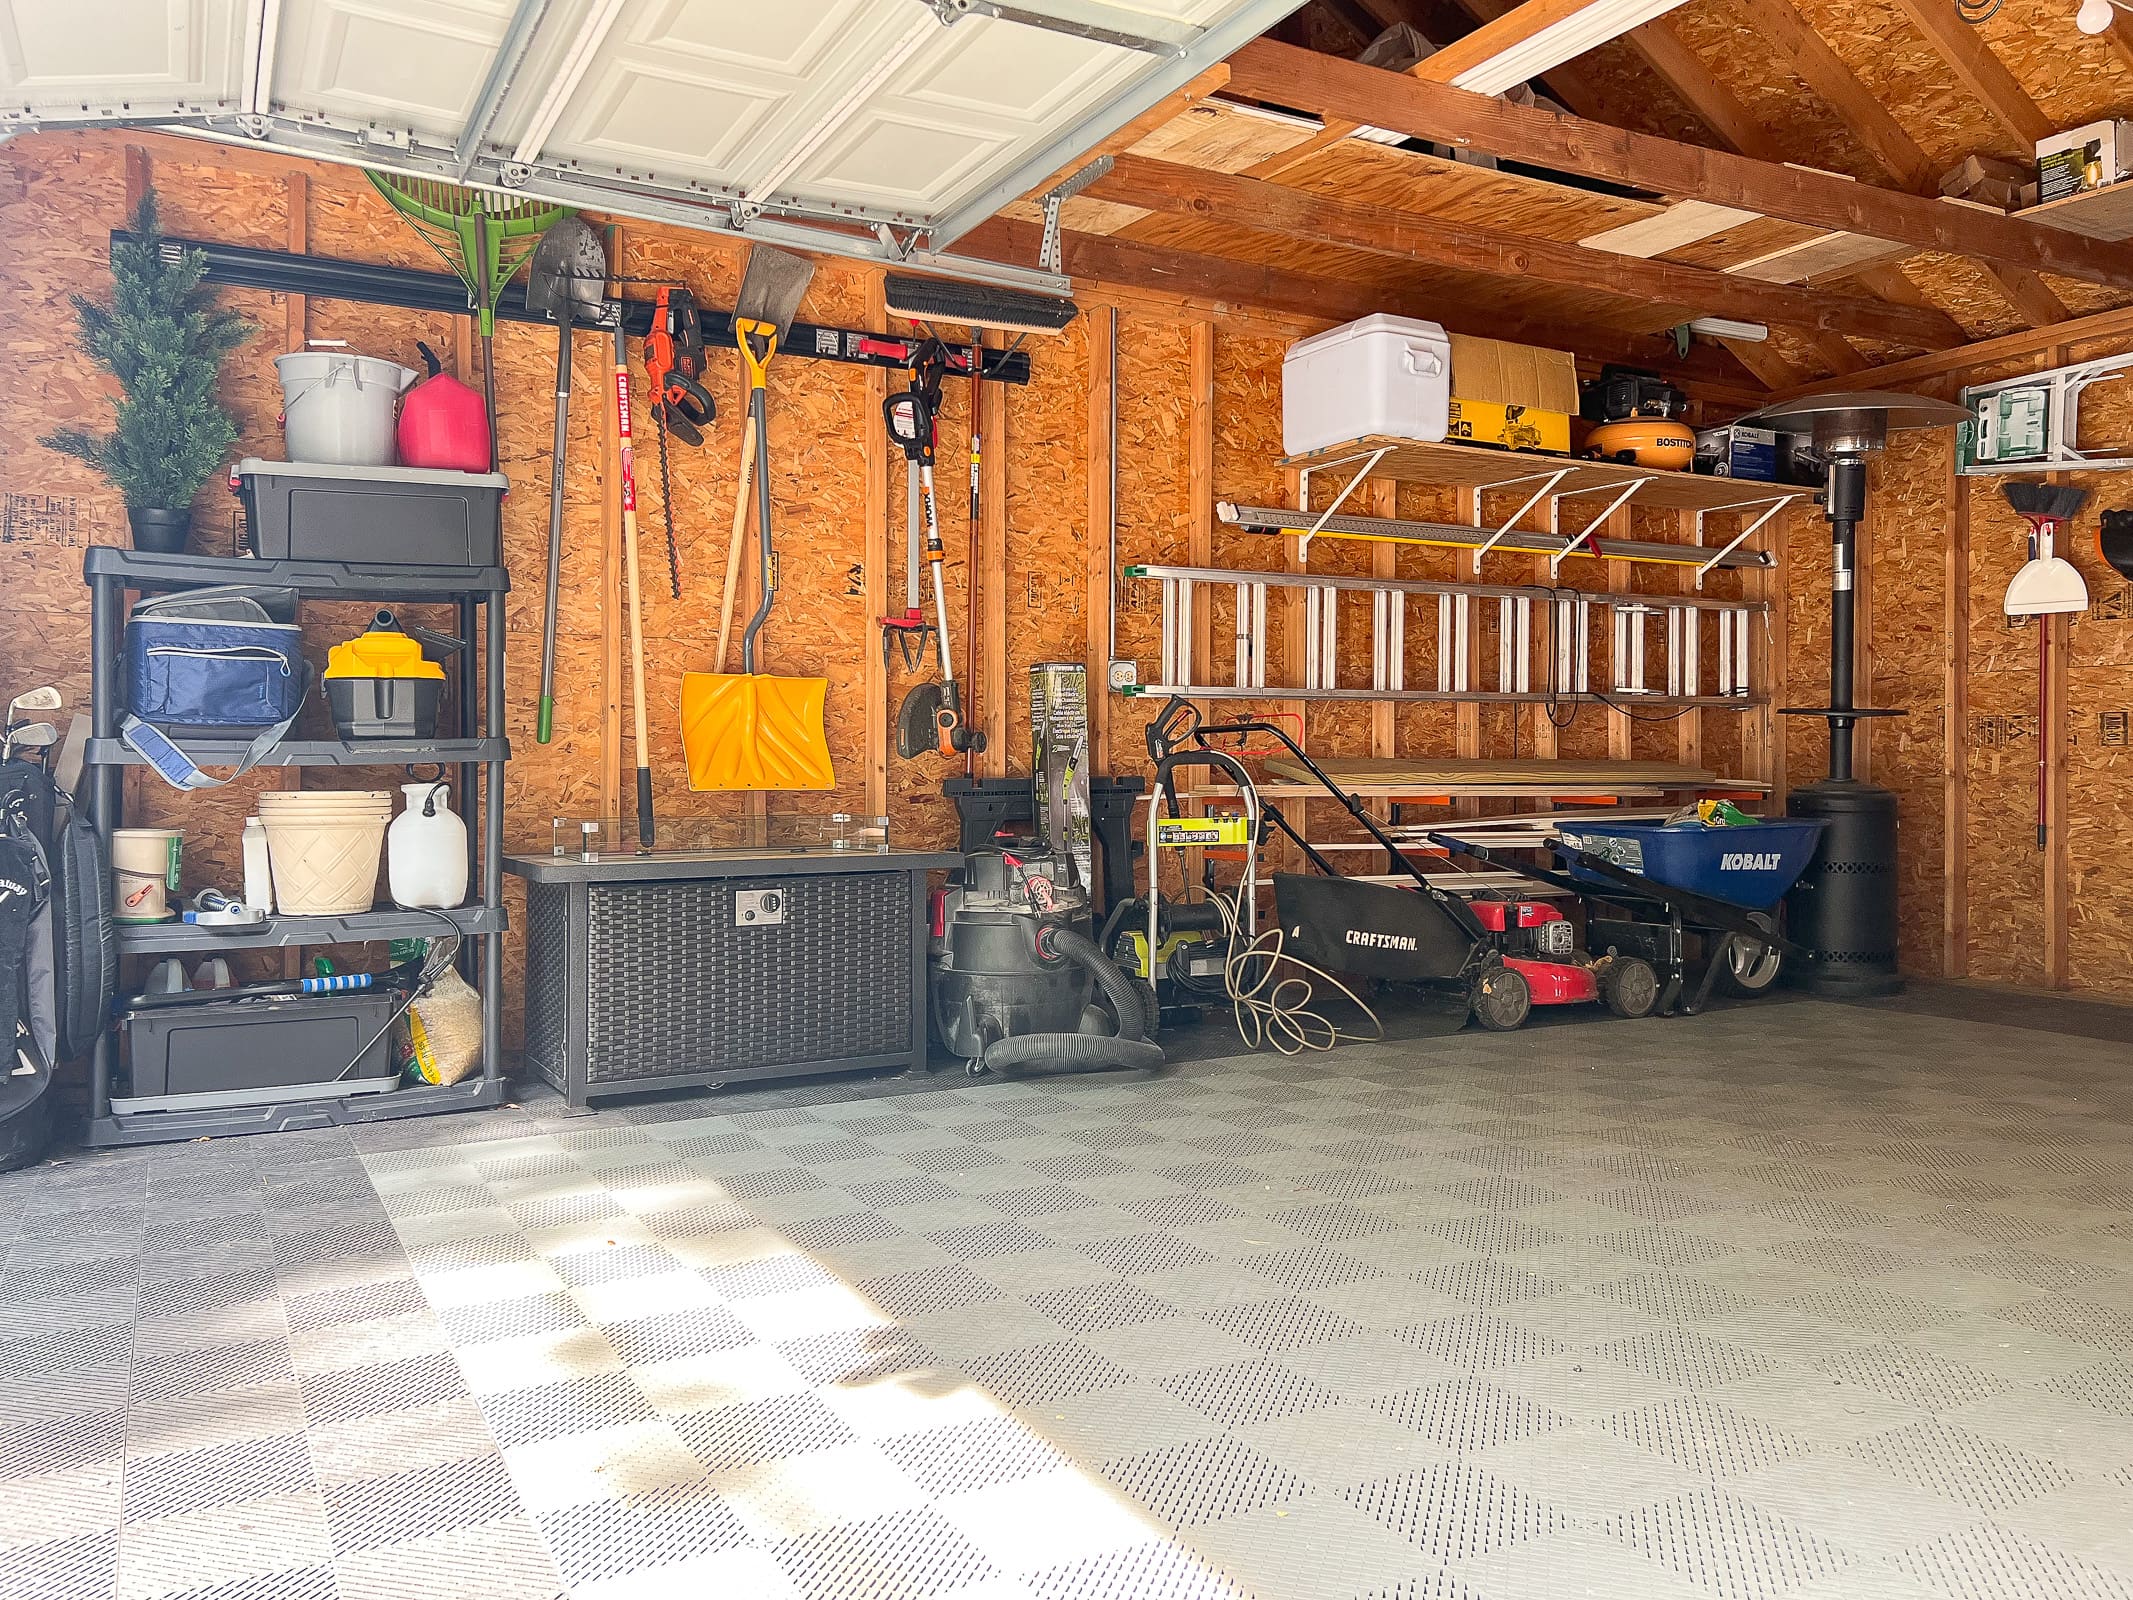 Our garage looks so much better after some decluttering